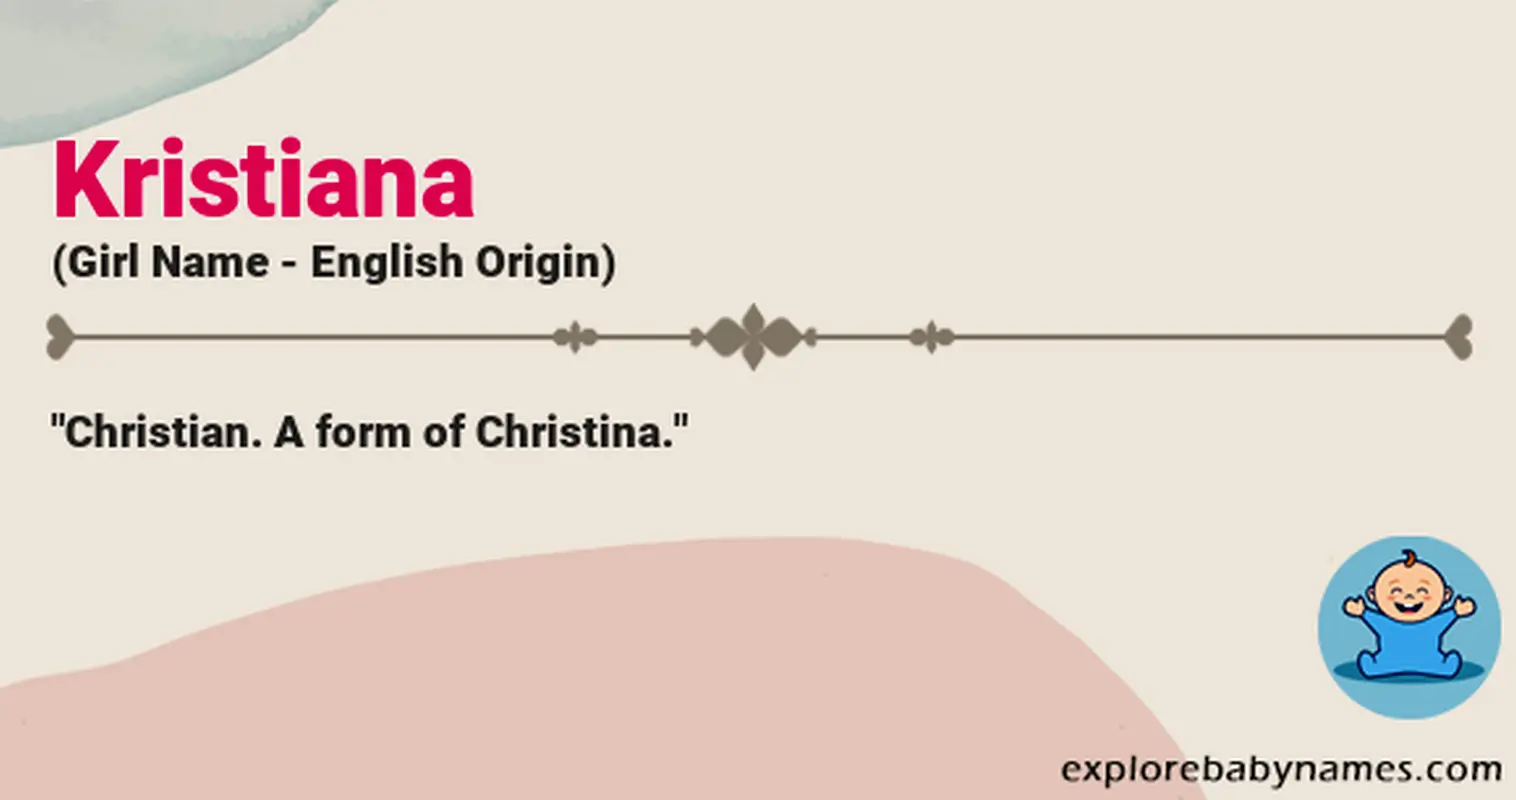 Meaning of Kristiana